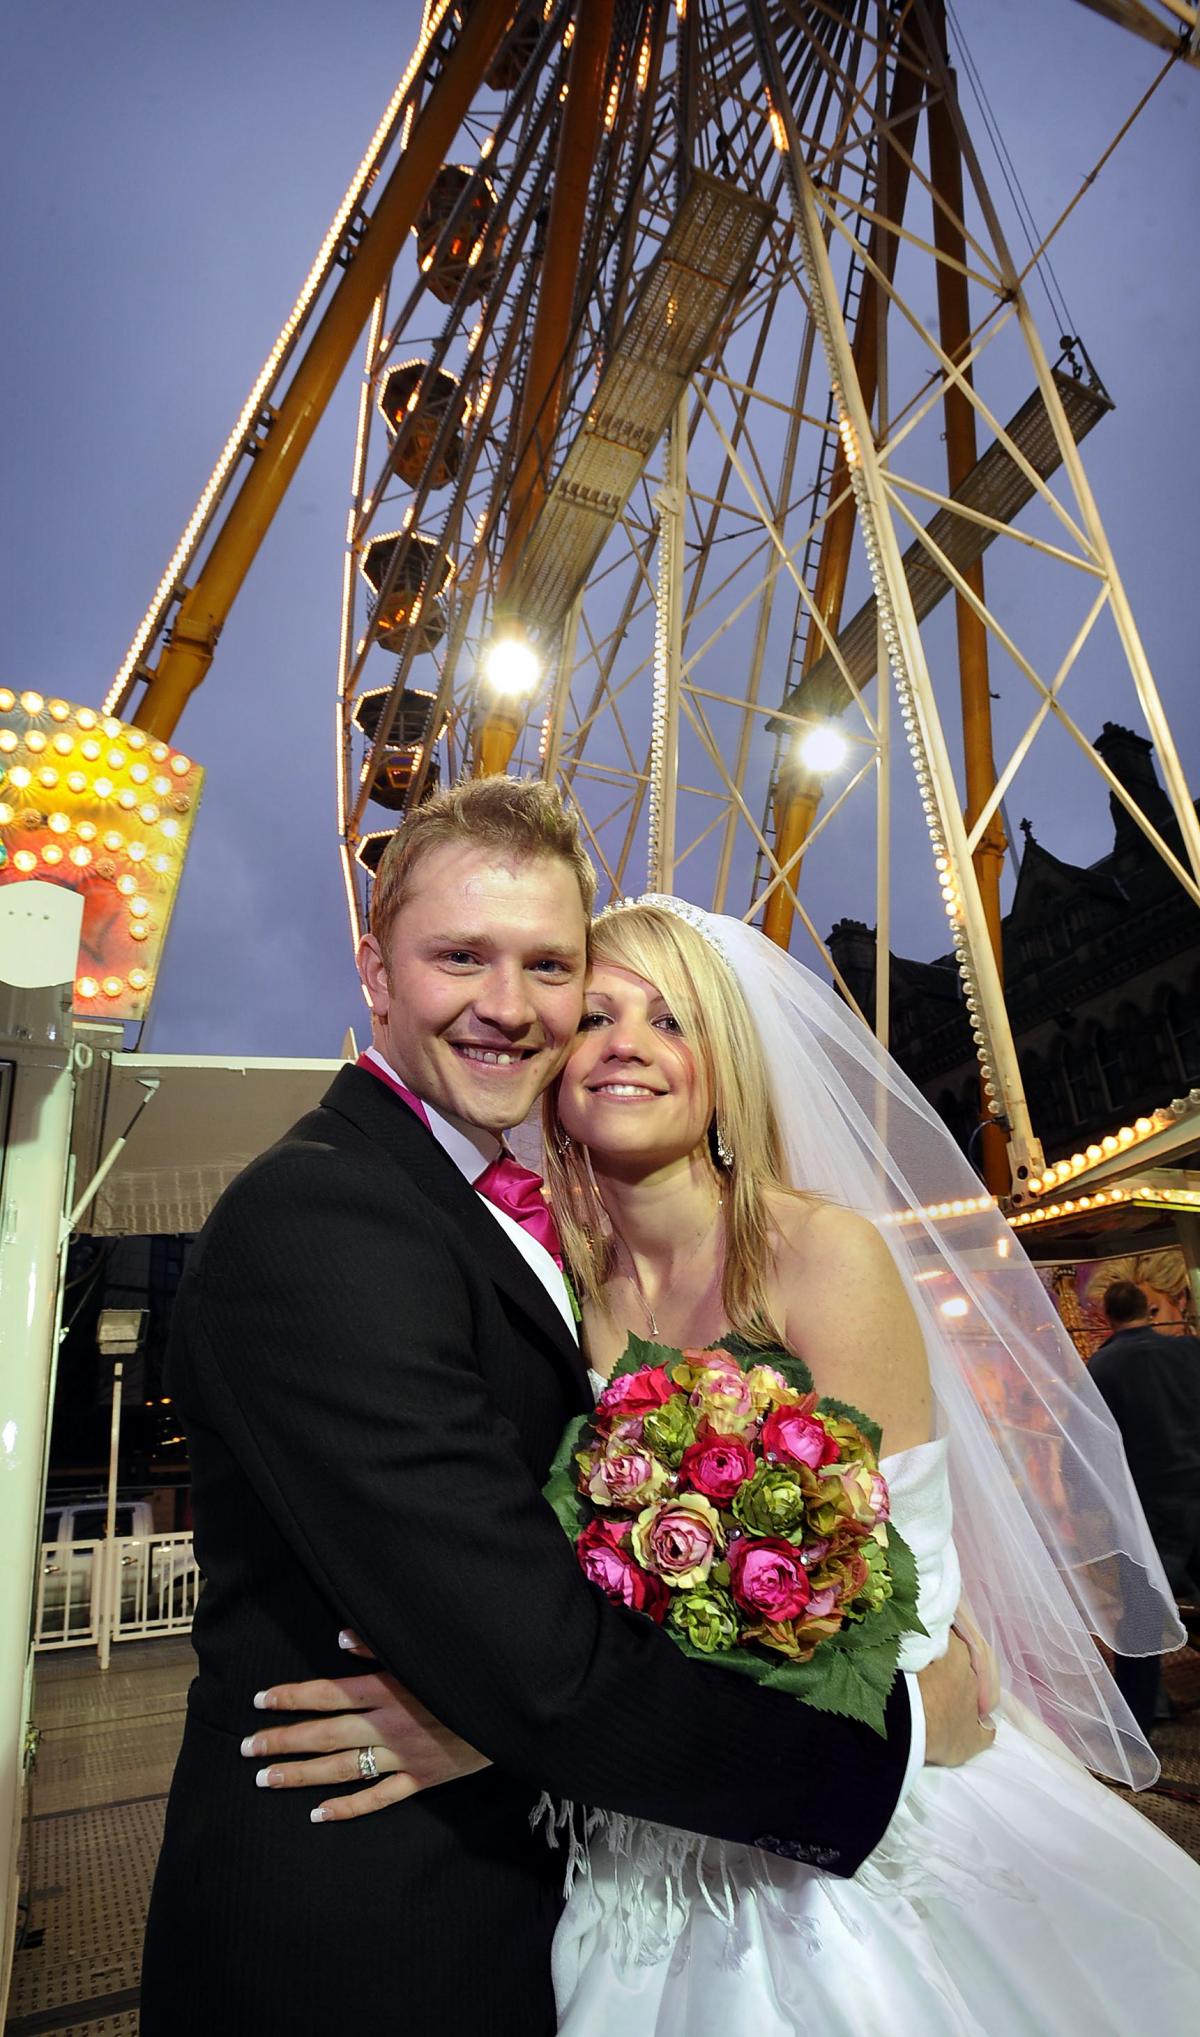 Martyn and Kelly Lewis in front of the big wheel in Centenary Square